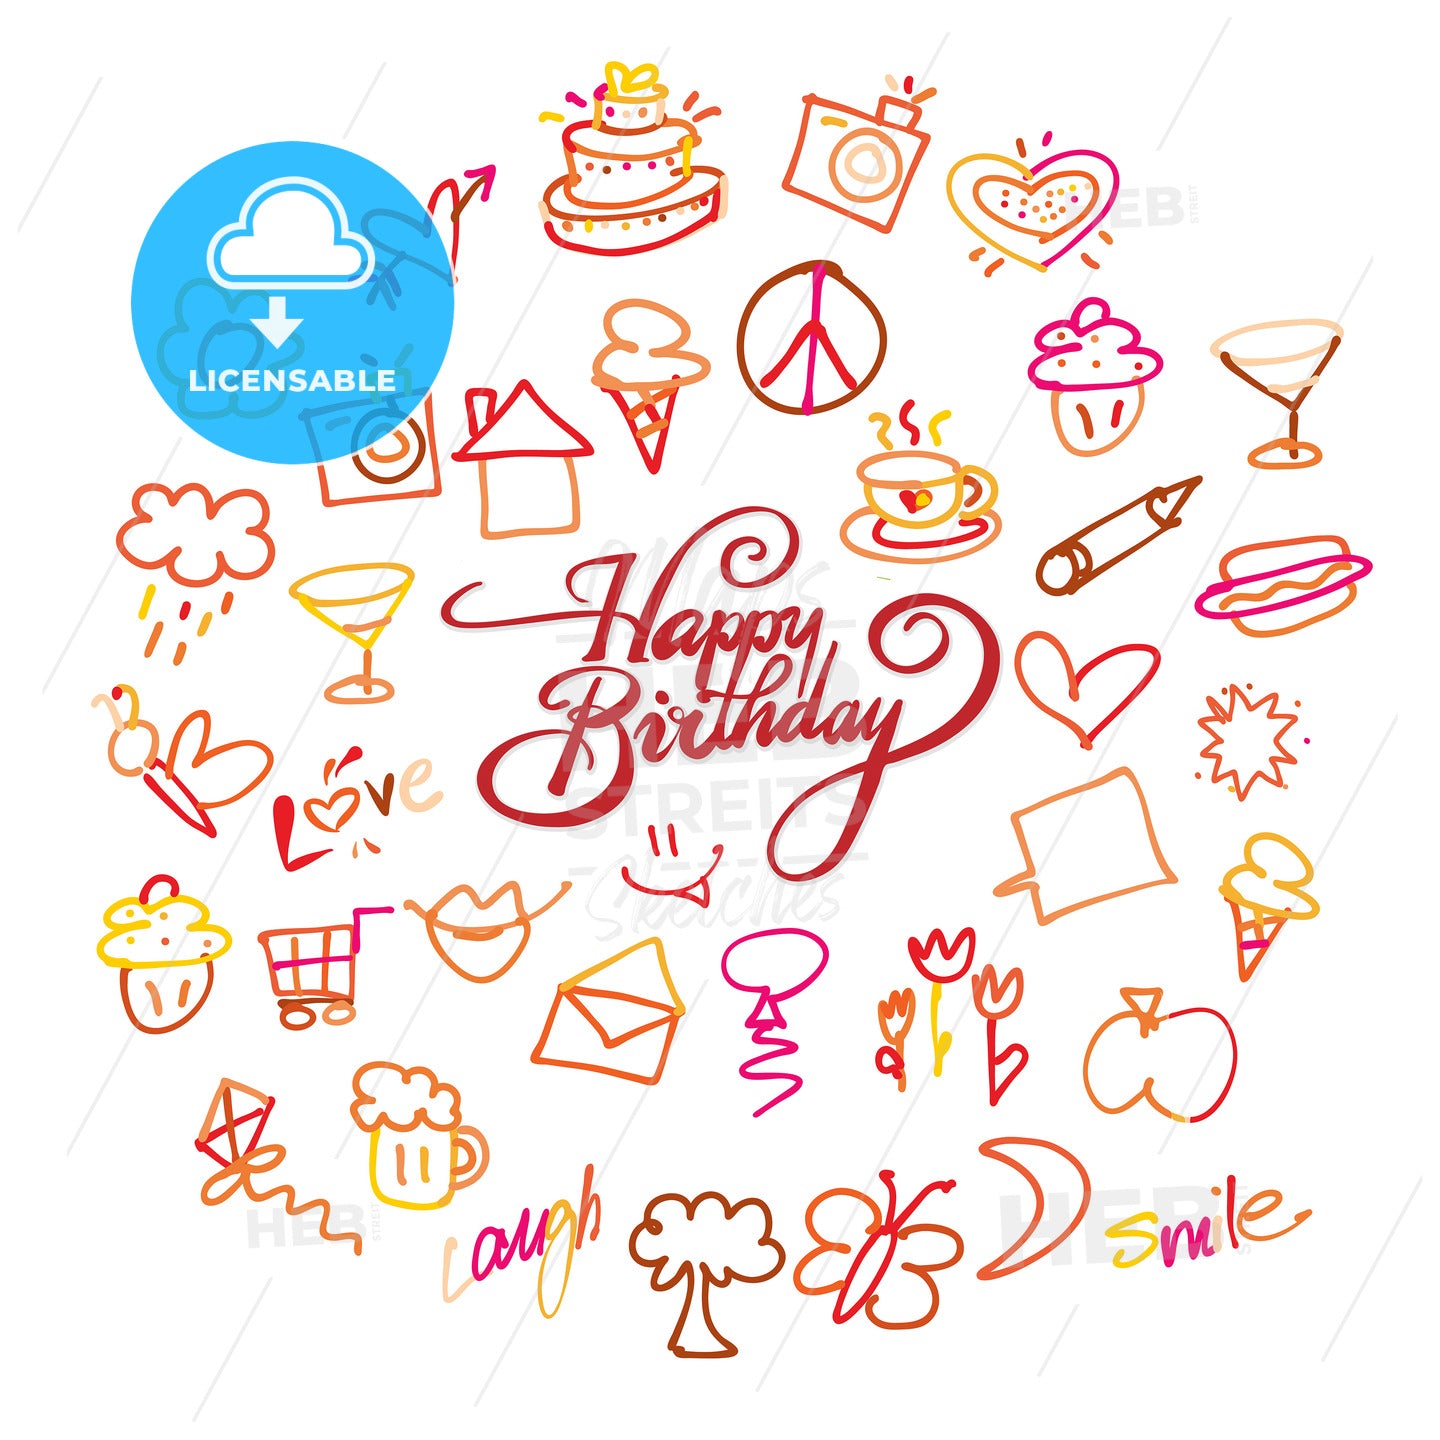 Happy birthday lettering and doodles – instant download